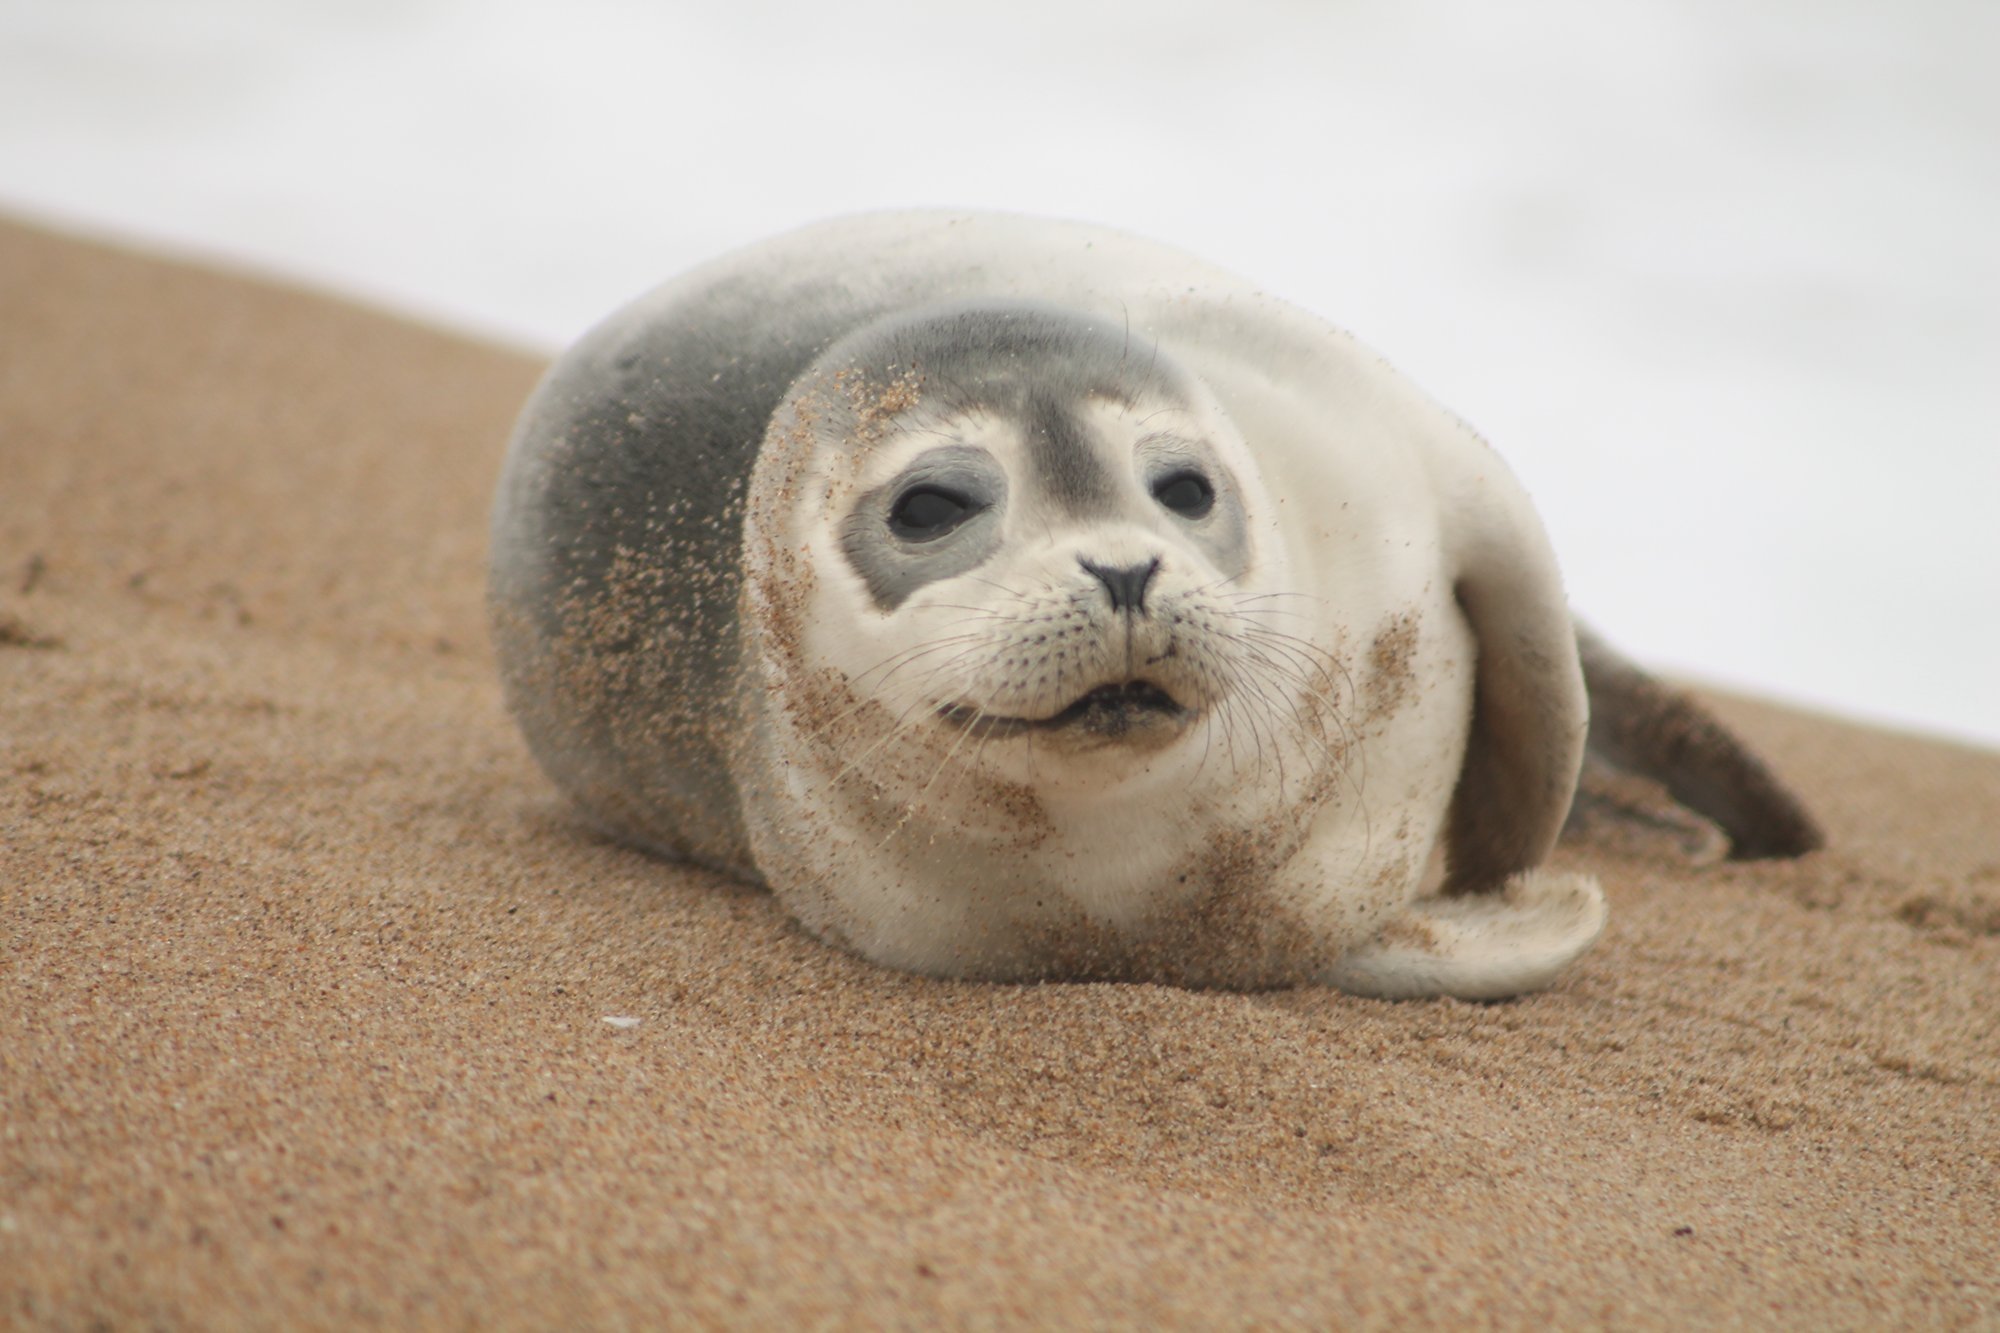 Harbor seals like this one have been showing up on New Hampshire beaches